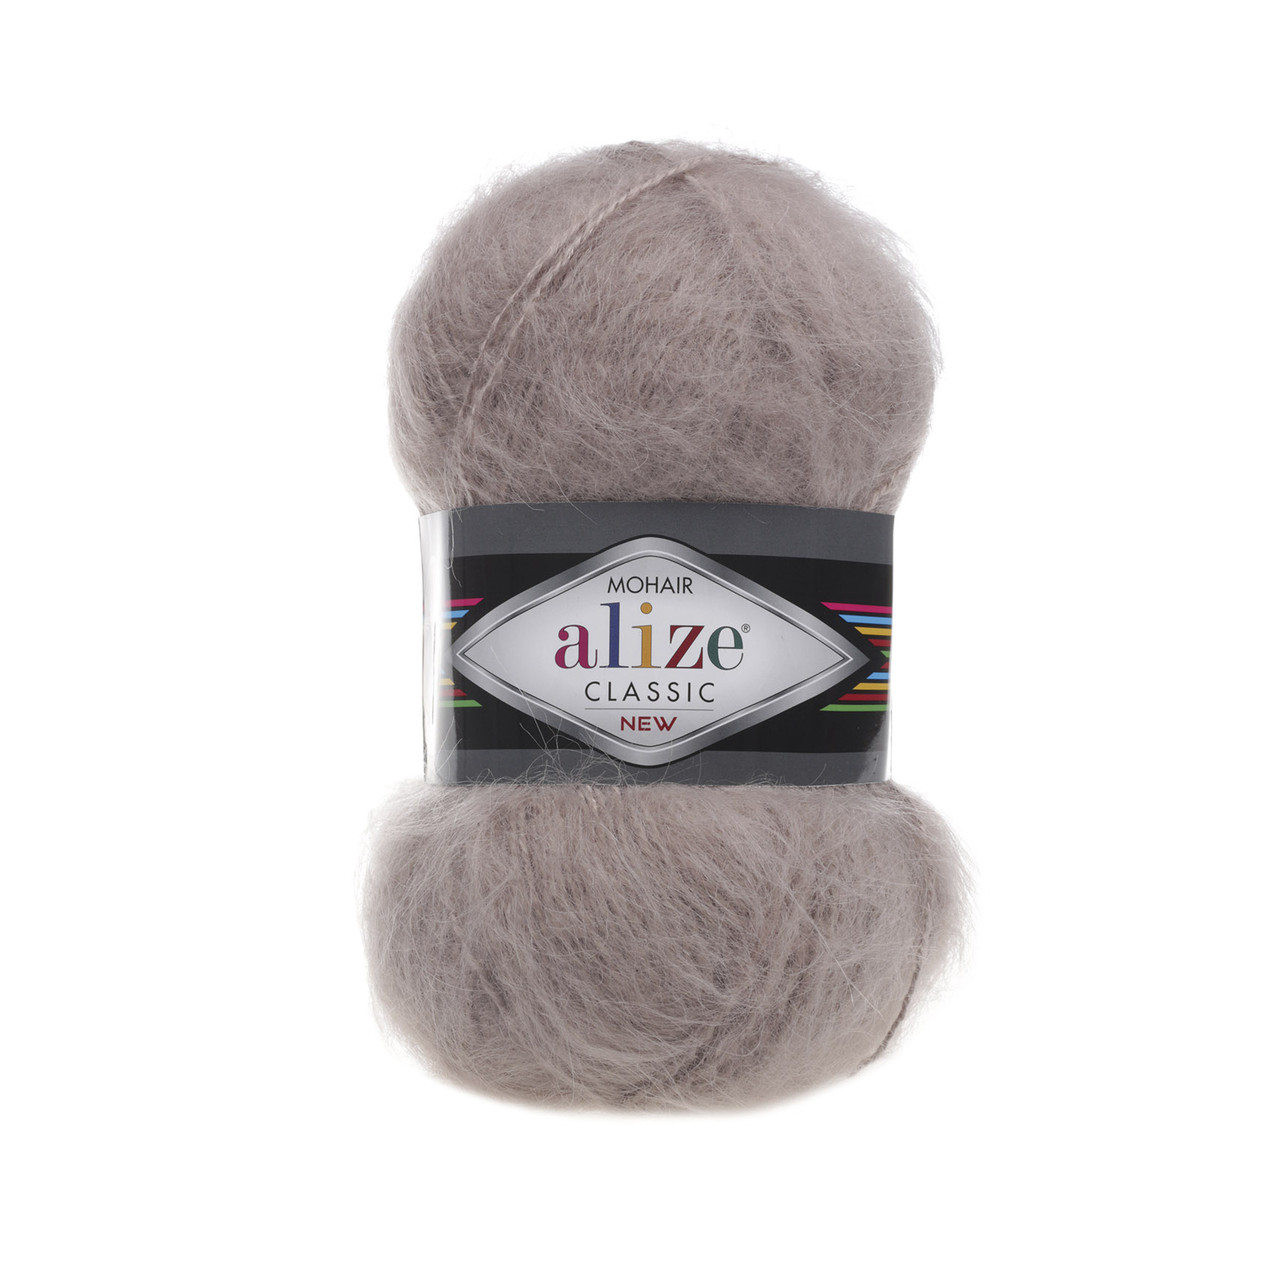 Alize Mohair Classic - 541 норка